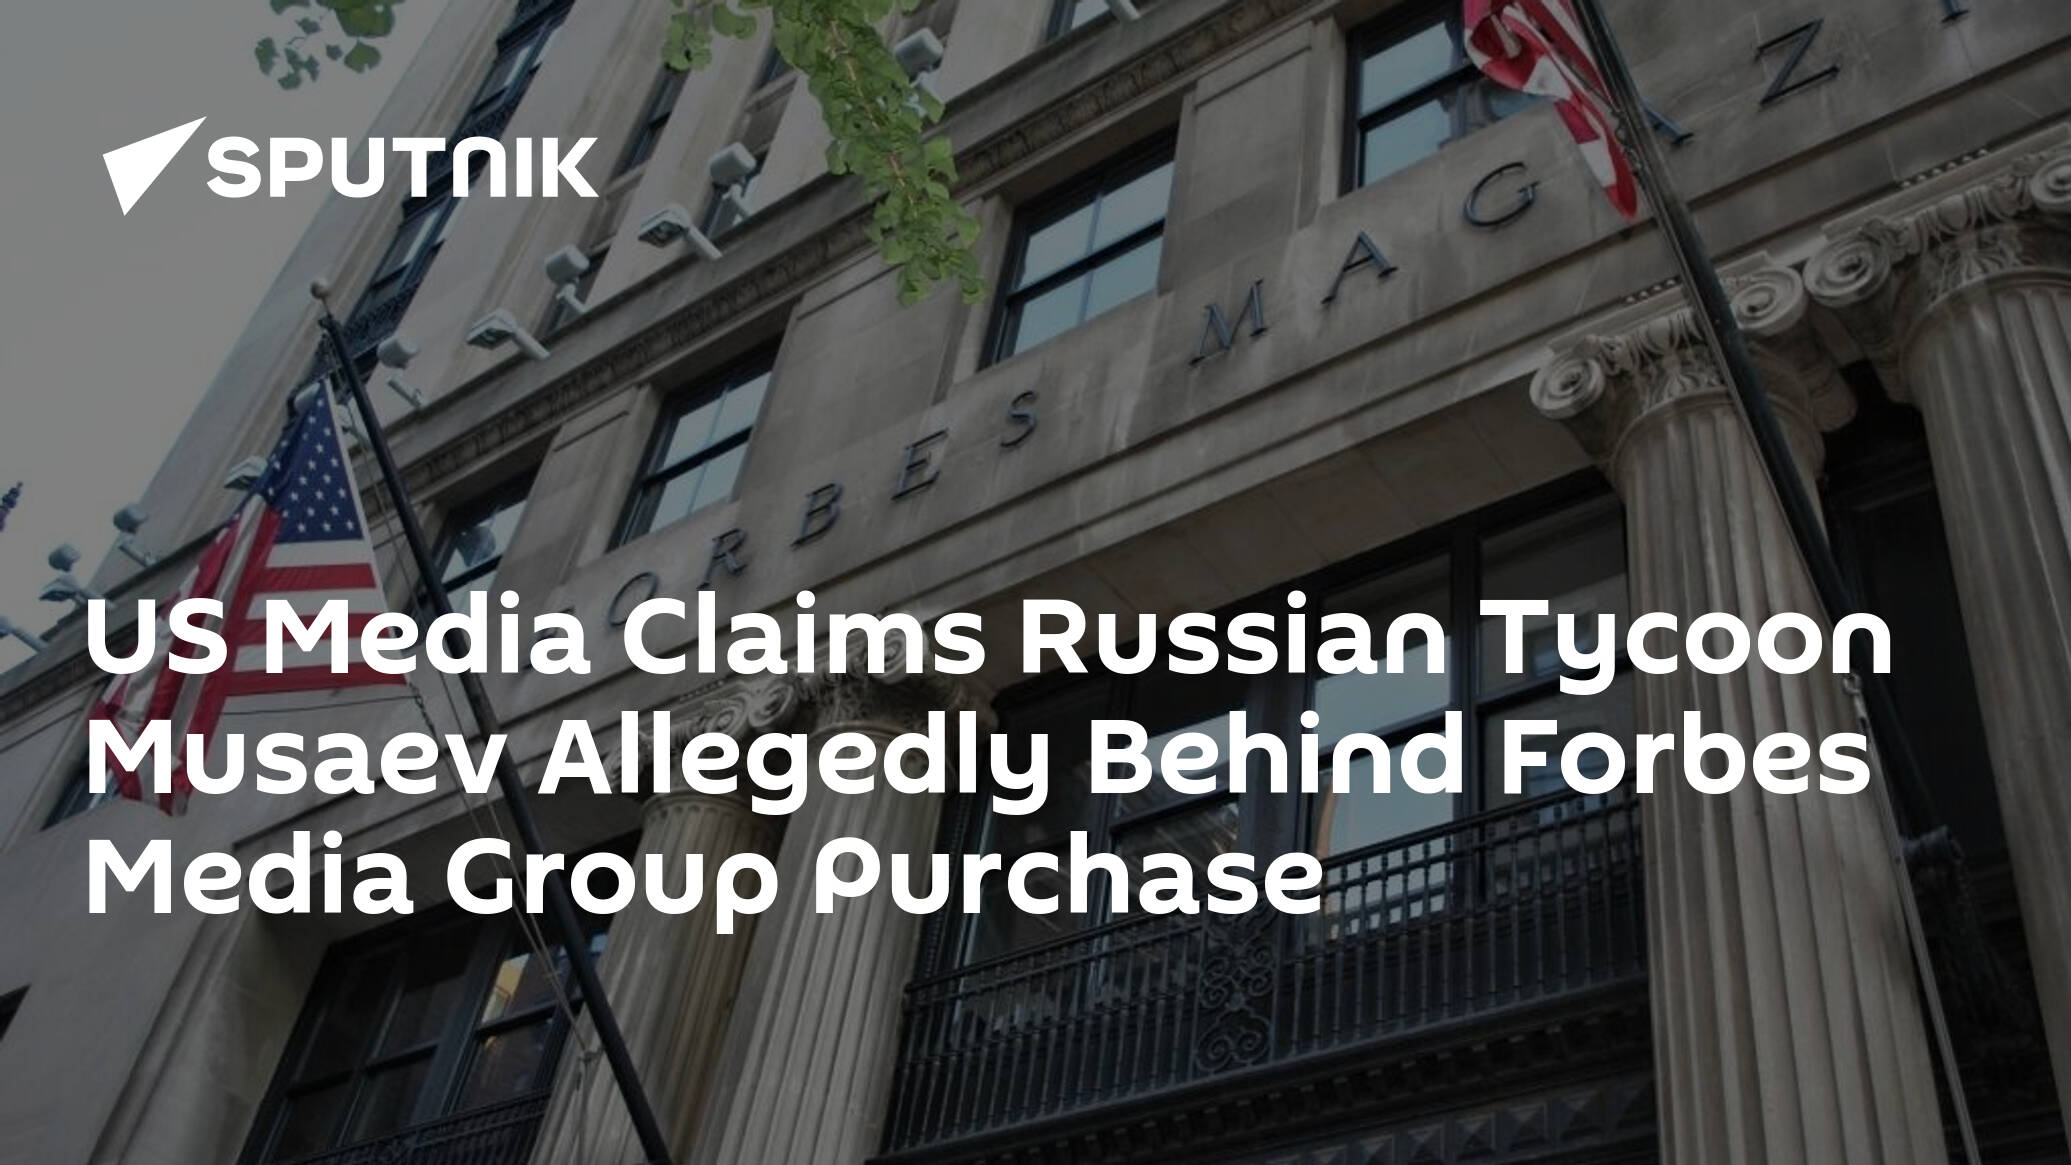 US Media Claims Russian Tycoon Musaev Allegedly Behind Forbes Media Group Purchase